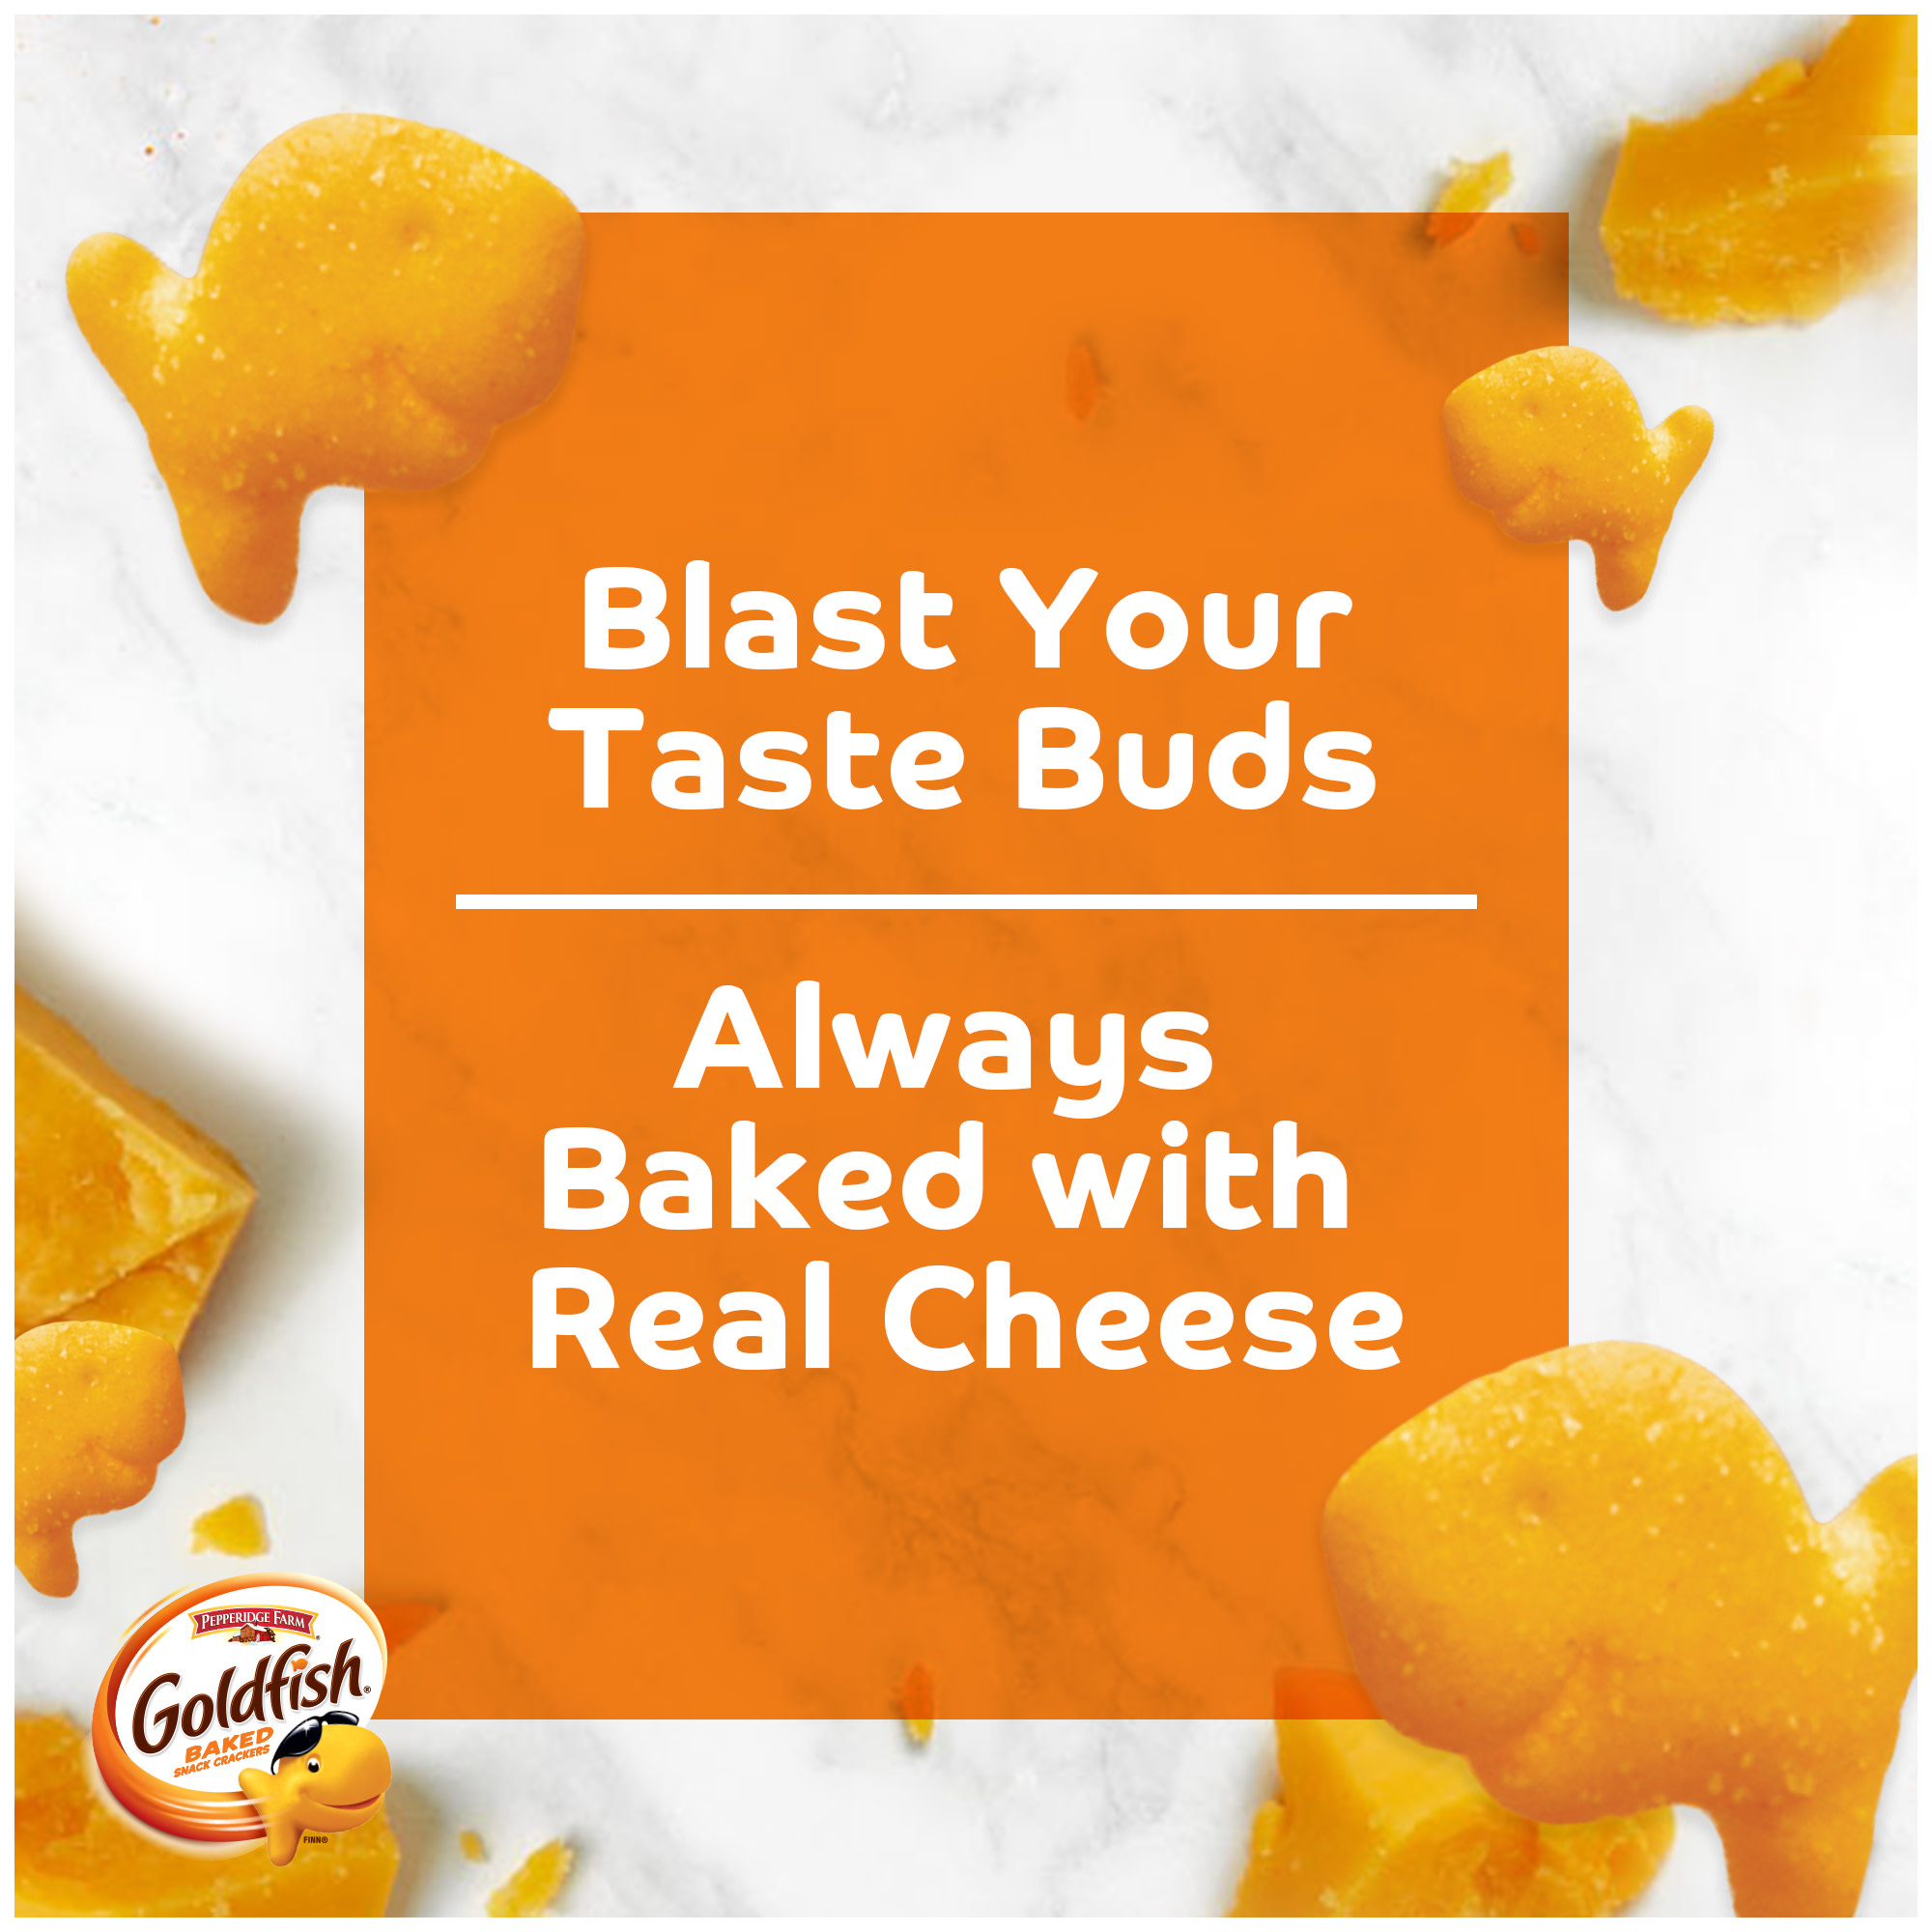 Goldfish Flavor Blasted Xtra Cheddar Cheese Crackers, Baked Snack Crackers, 30 oz Carton - image 3 of 12